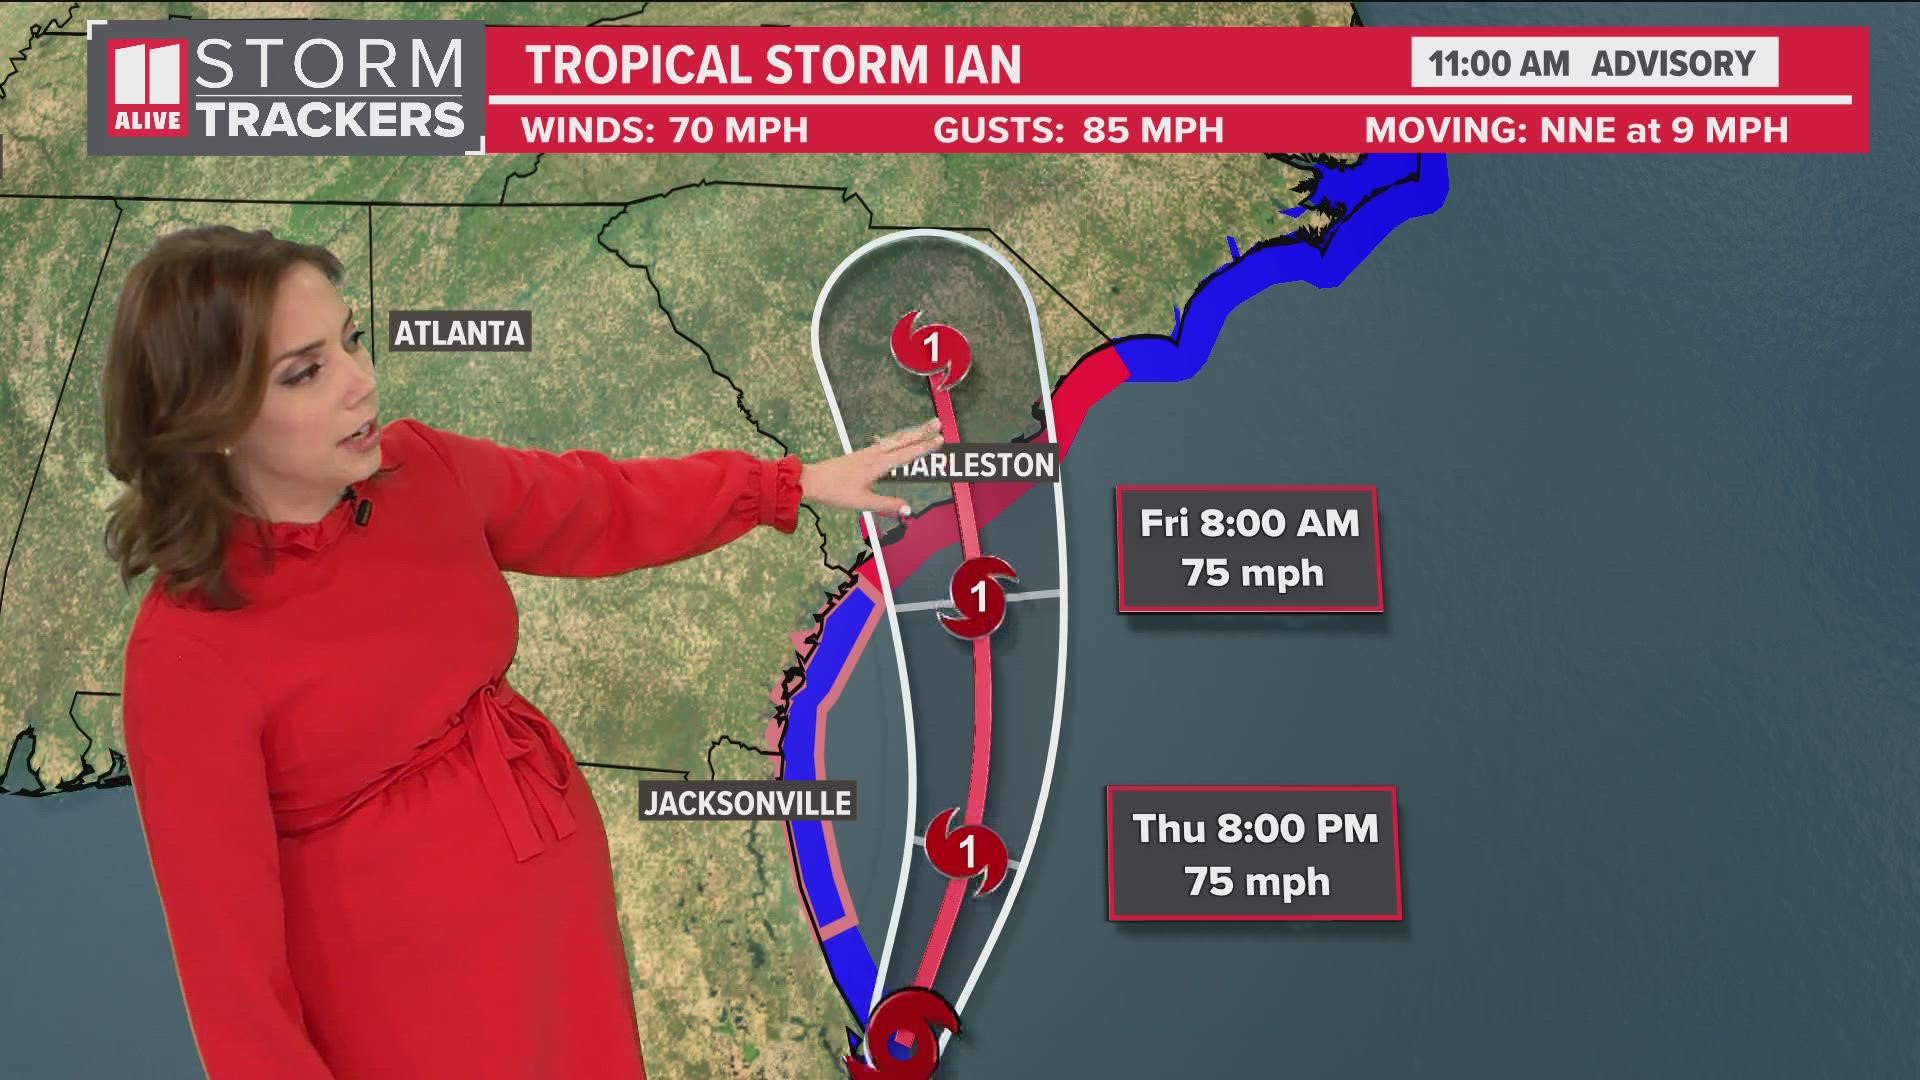 Tropical Storm Ian is expected to become a hurricane again as it moves up the coast.